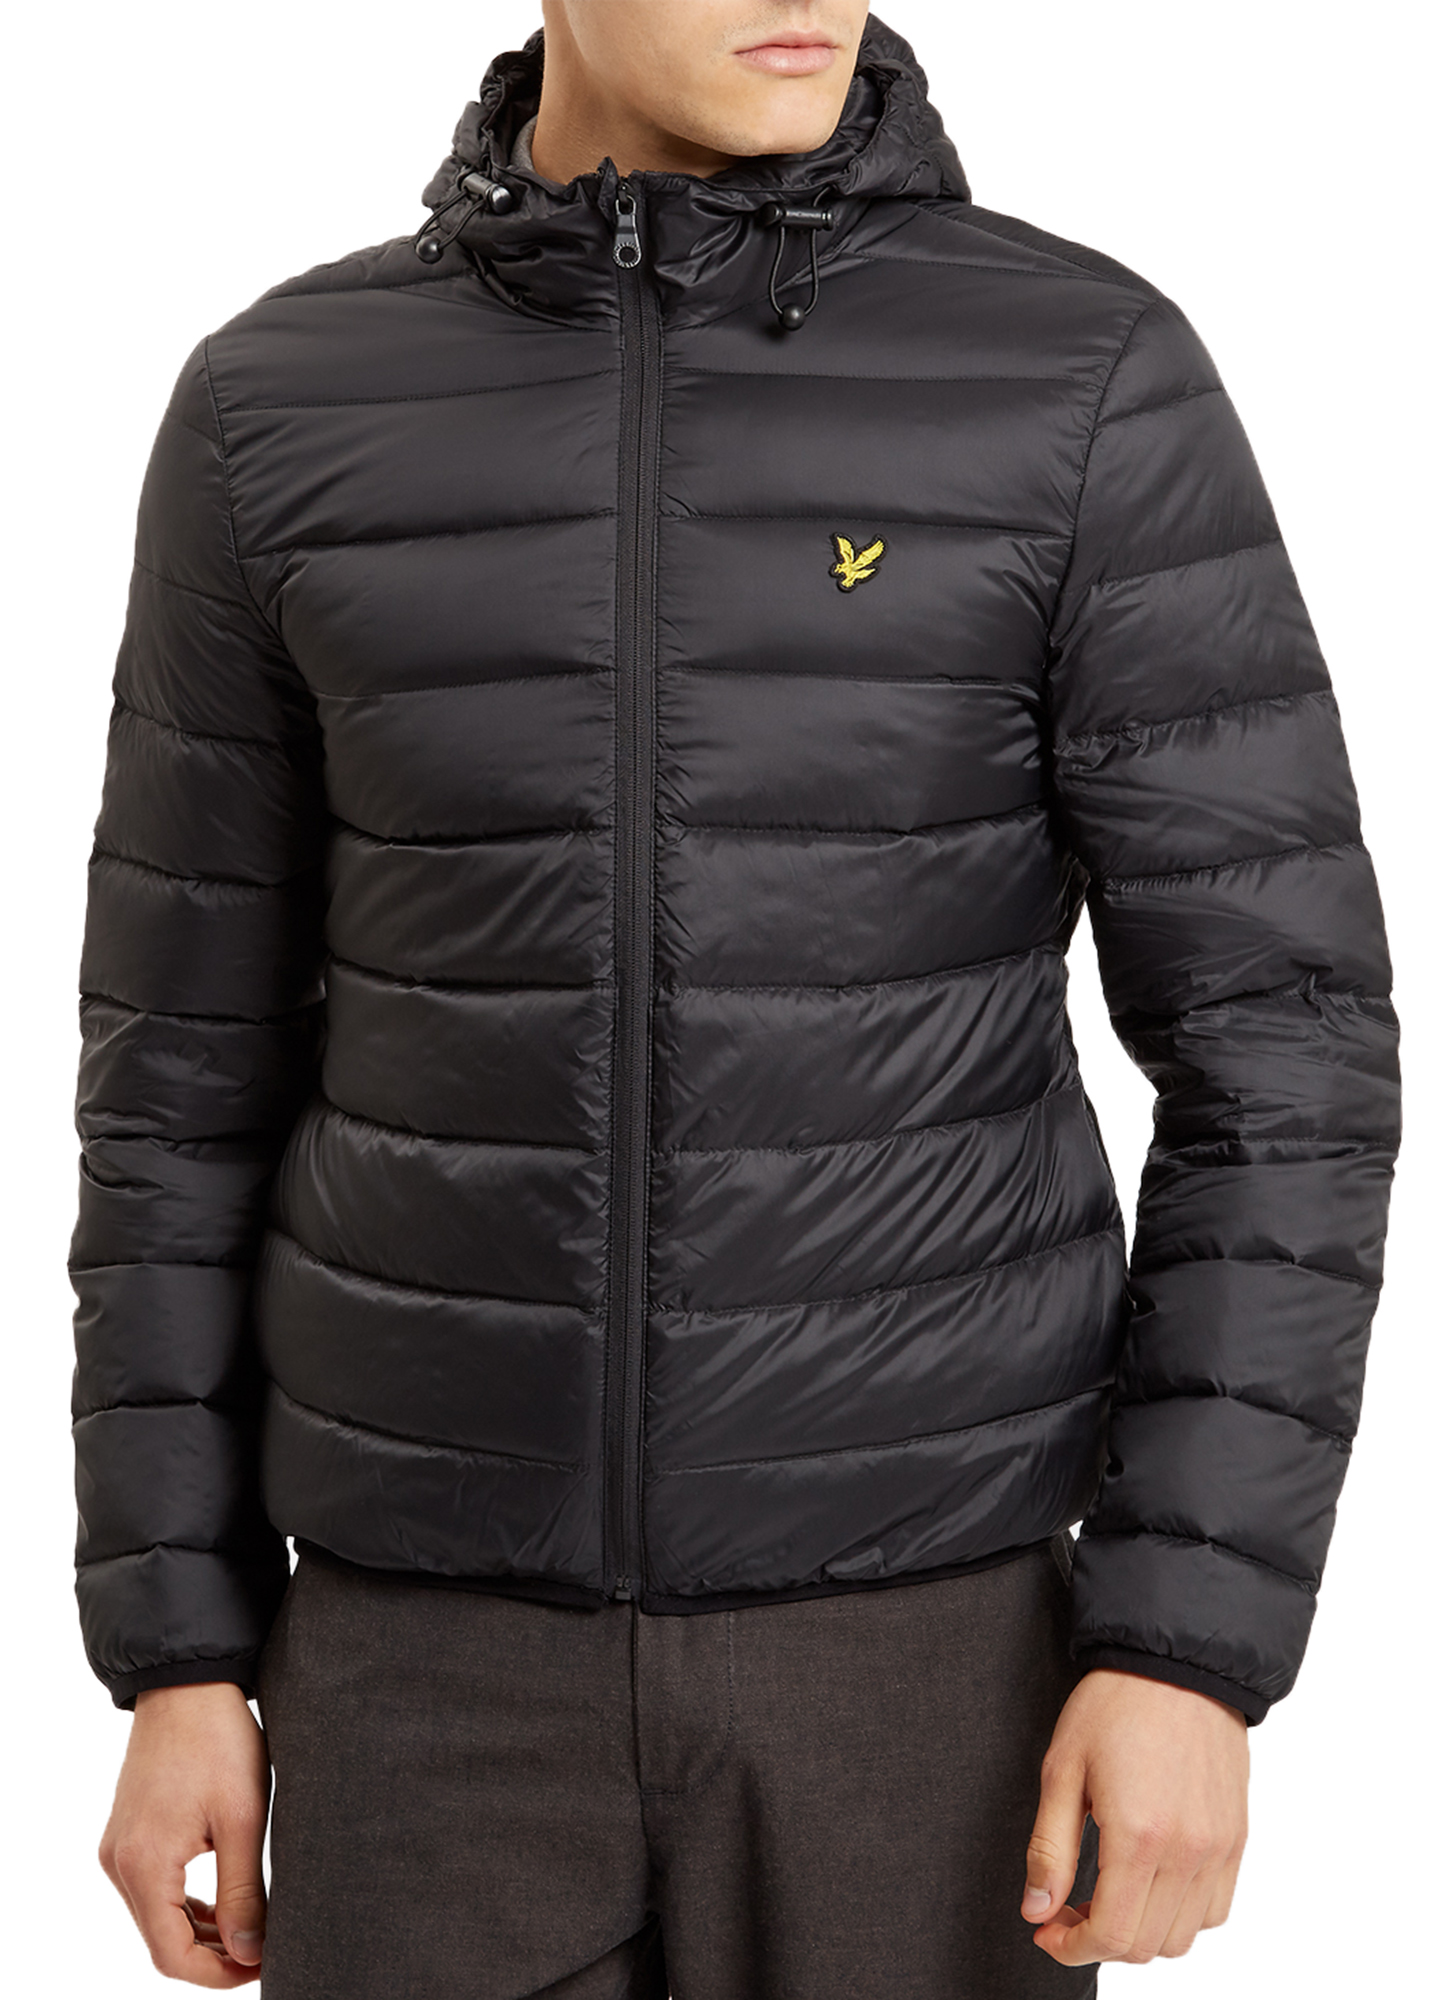 Lyle & Scott Mens Quilt Puffer Jacket Padded Warm Hooded Outdoor Coat ...